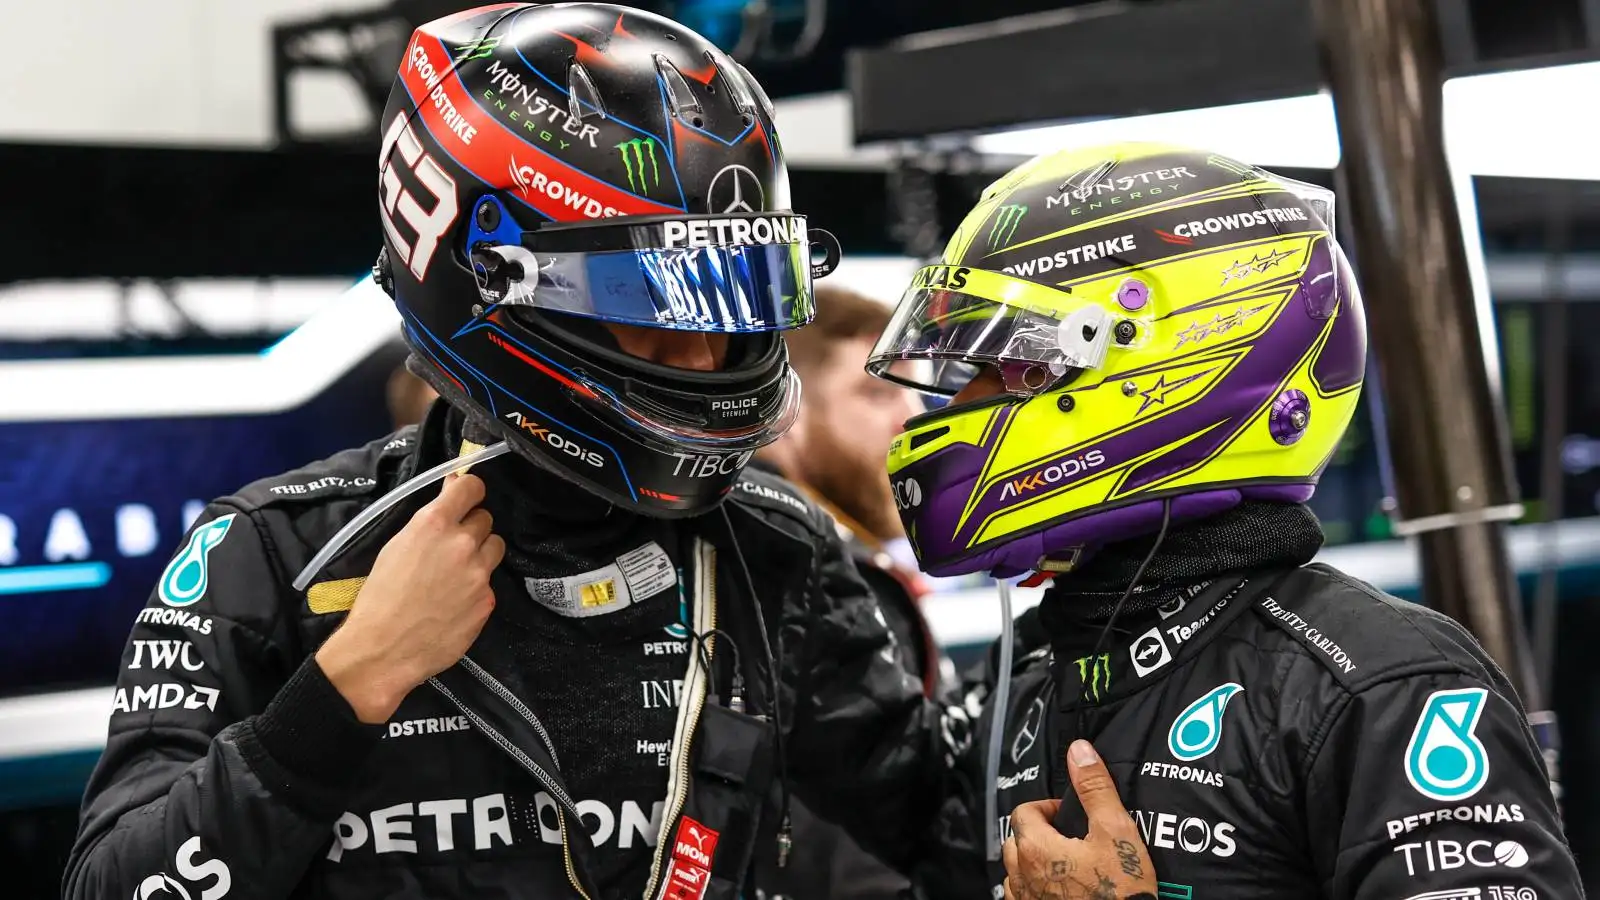 George Russell and Lewis Hamilton talk in the Mercedes garage. Saudi Arabia, March 2022.